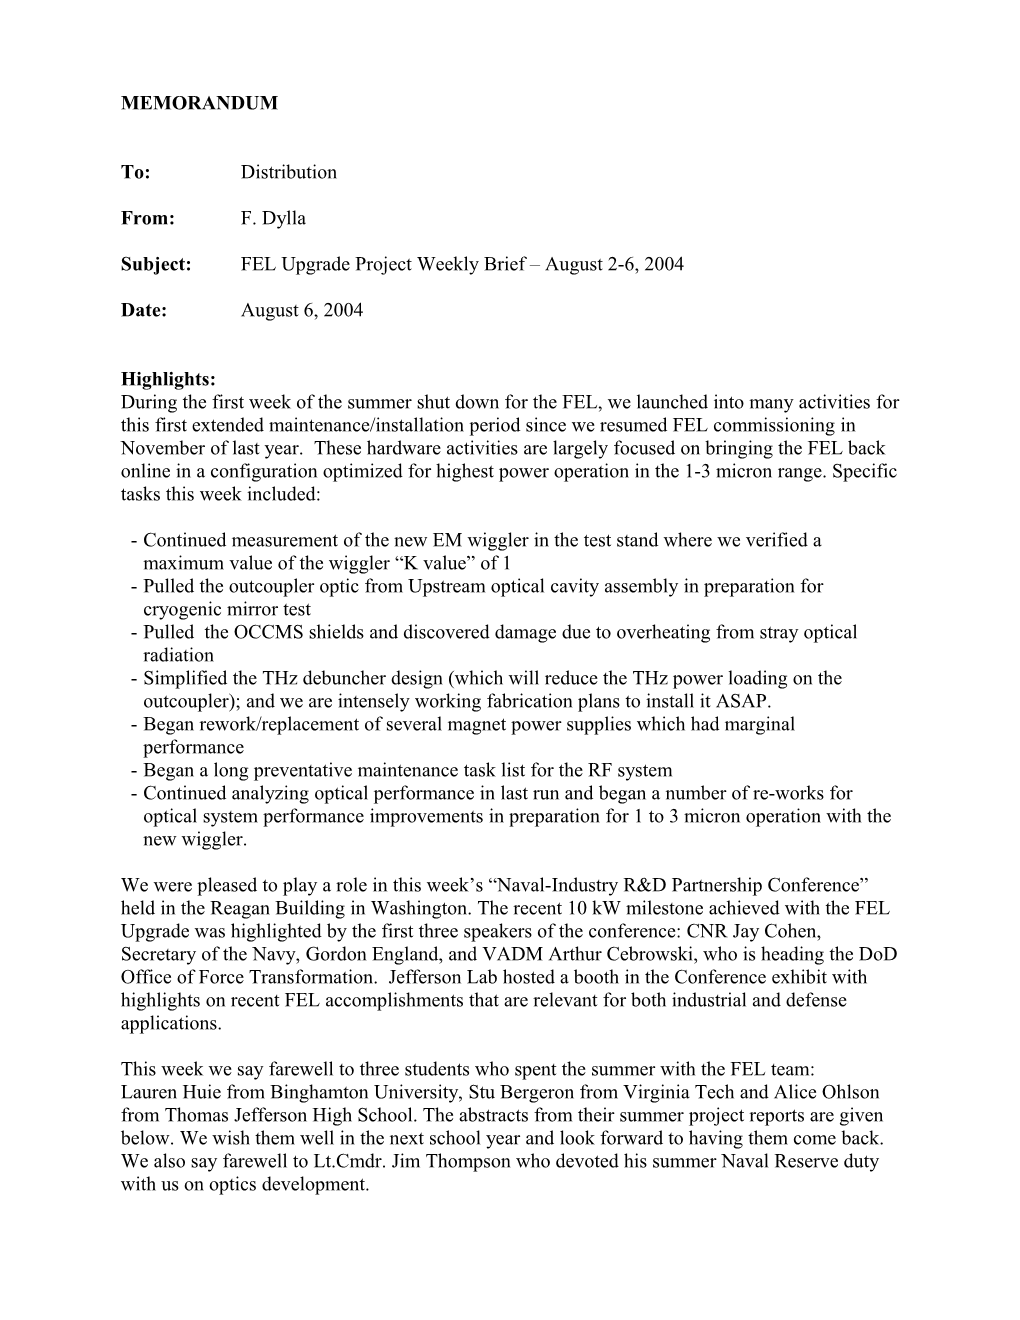 Subject:FEL Upgrade Project Weekly Brief August 2-6, 2004